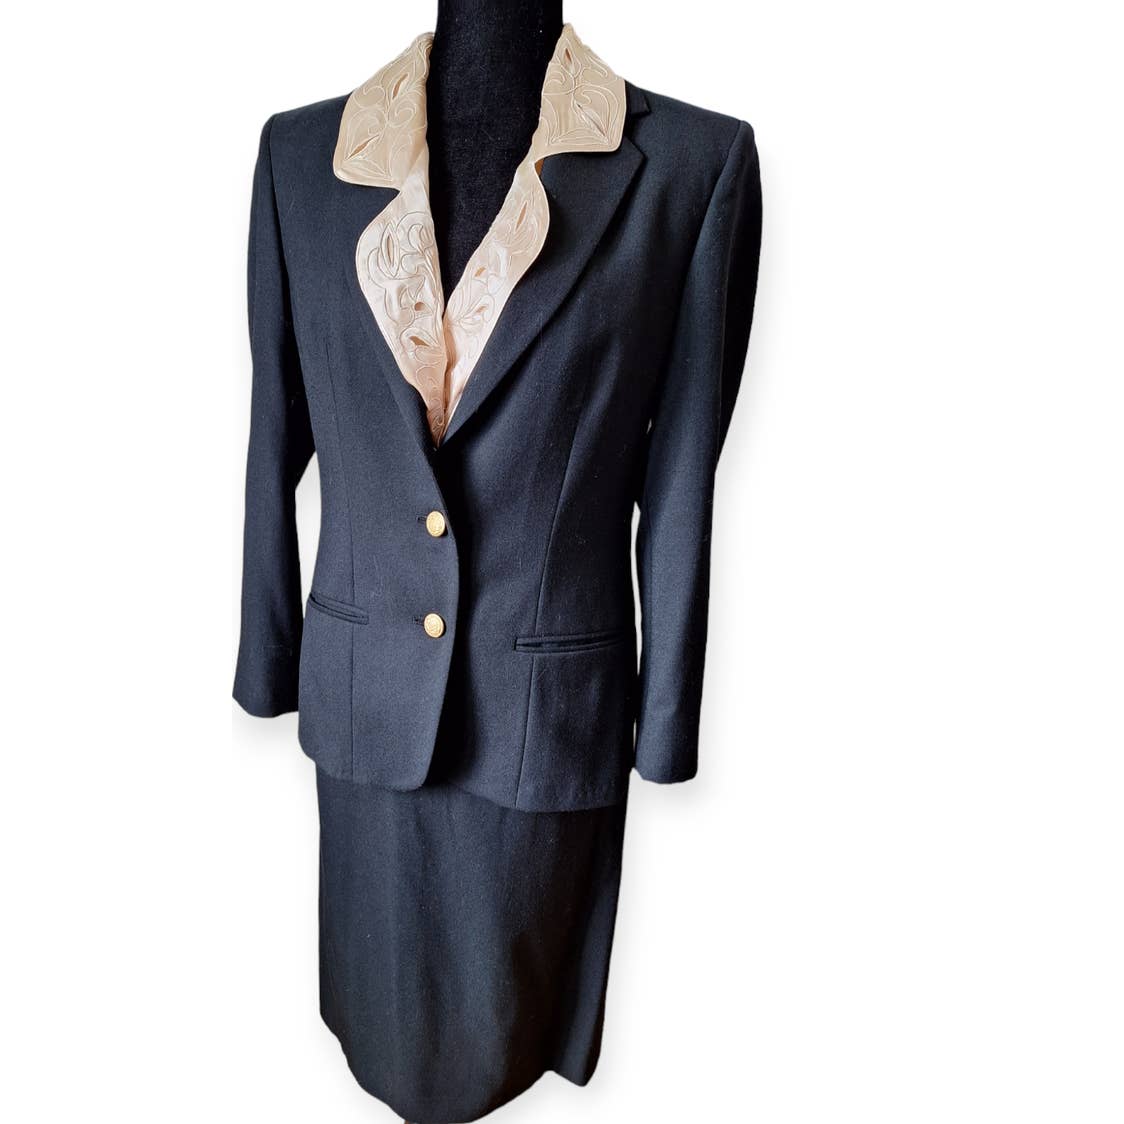 Vintage 80s Black Wool Gold Button Tailored Skirt Suit Size 6 - themallvintage The Mall Vintage